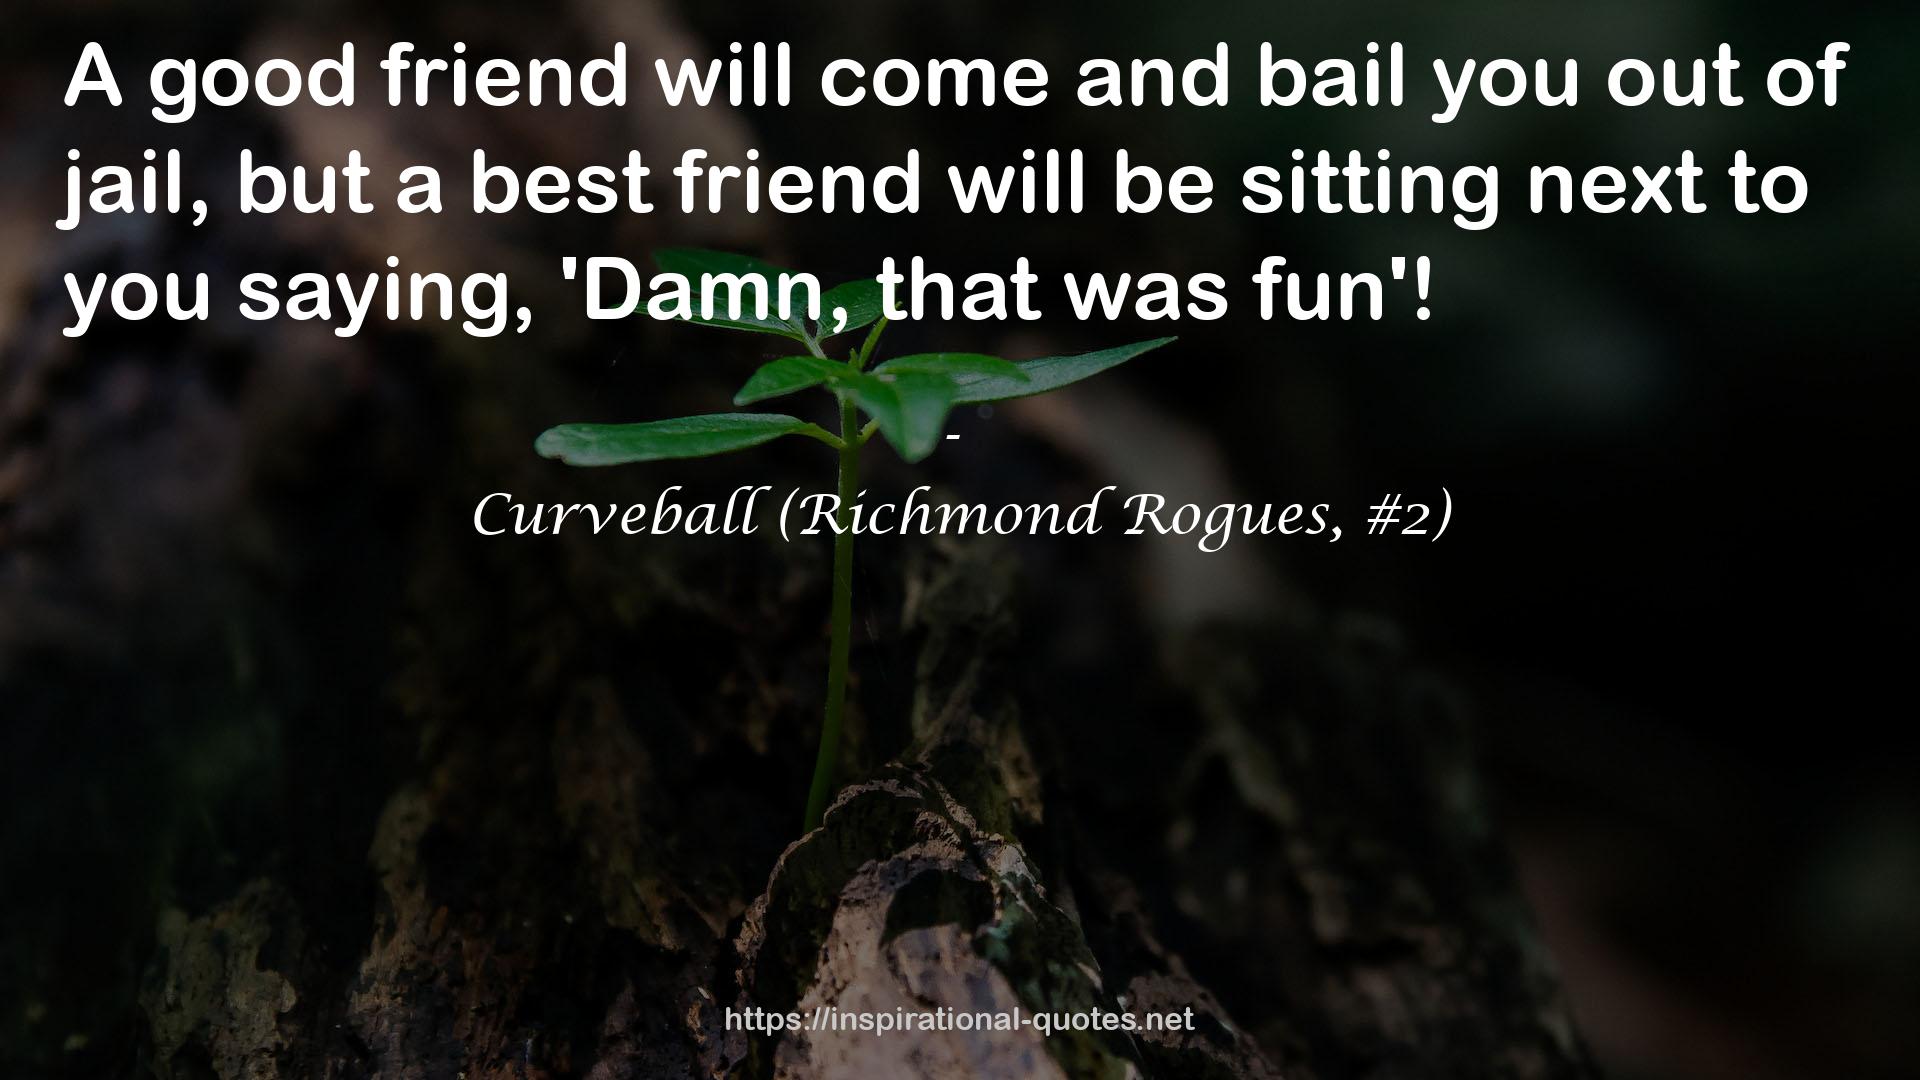 Curveball (Richmond Rogues, #2) QUOTES